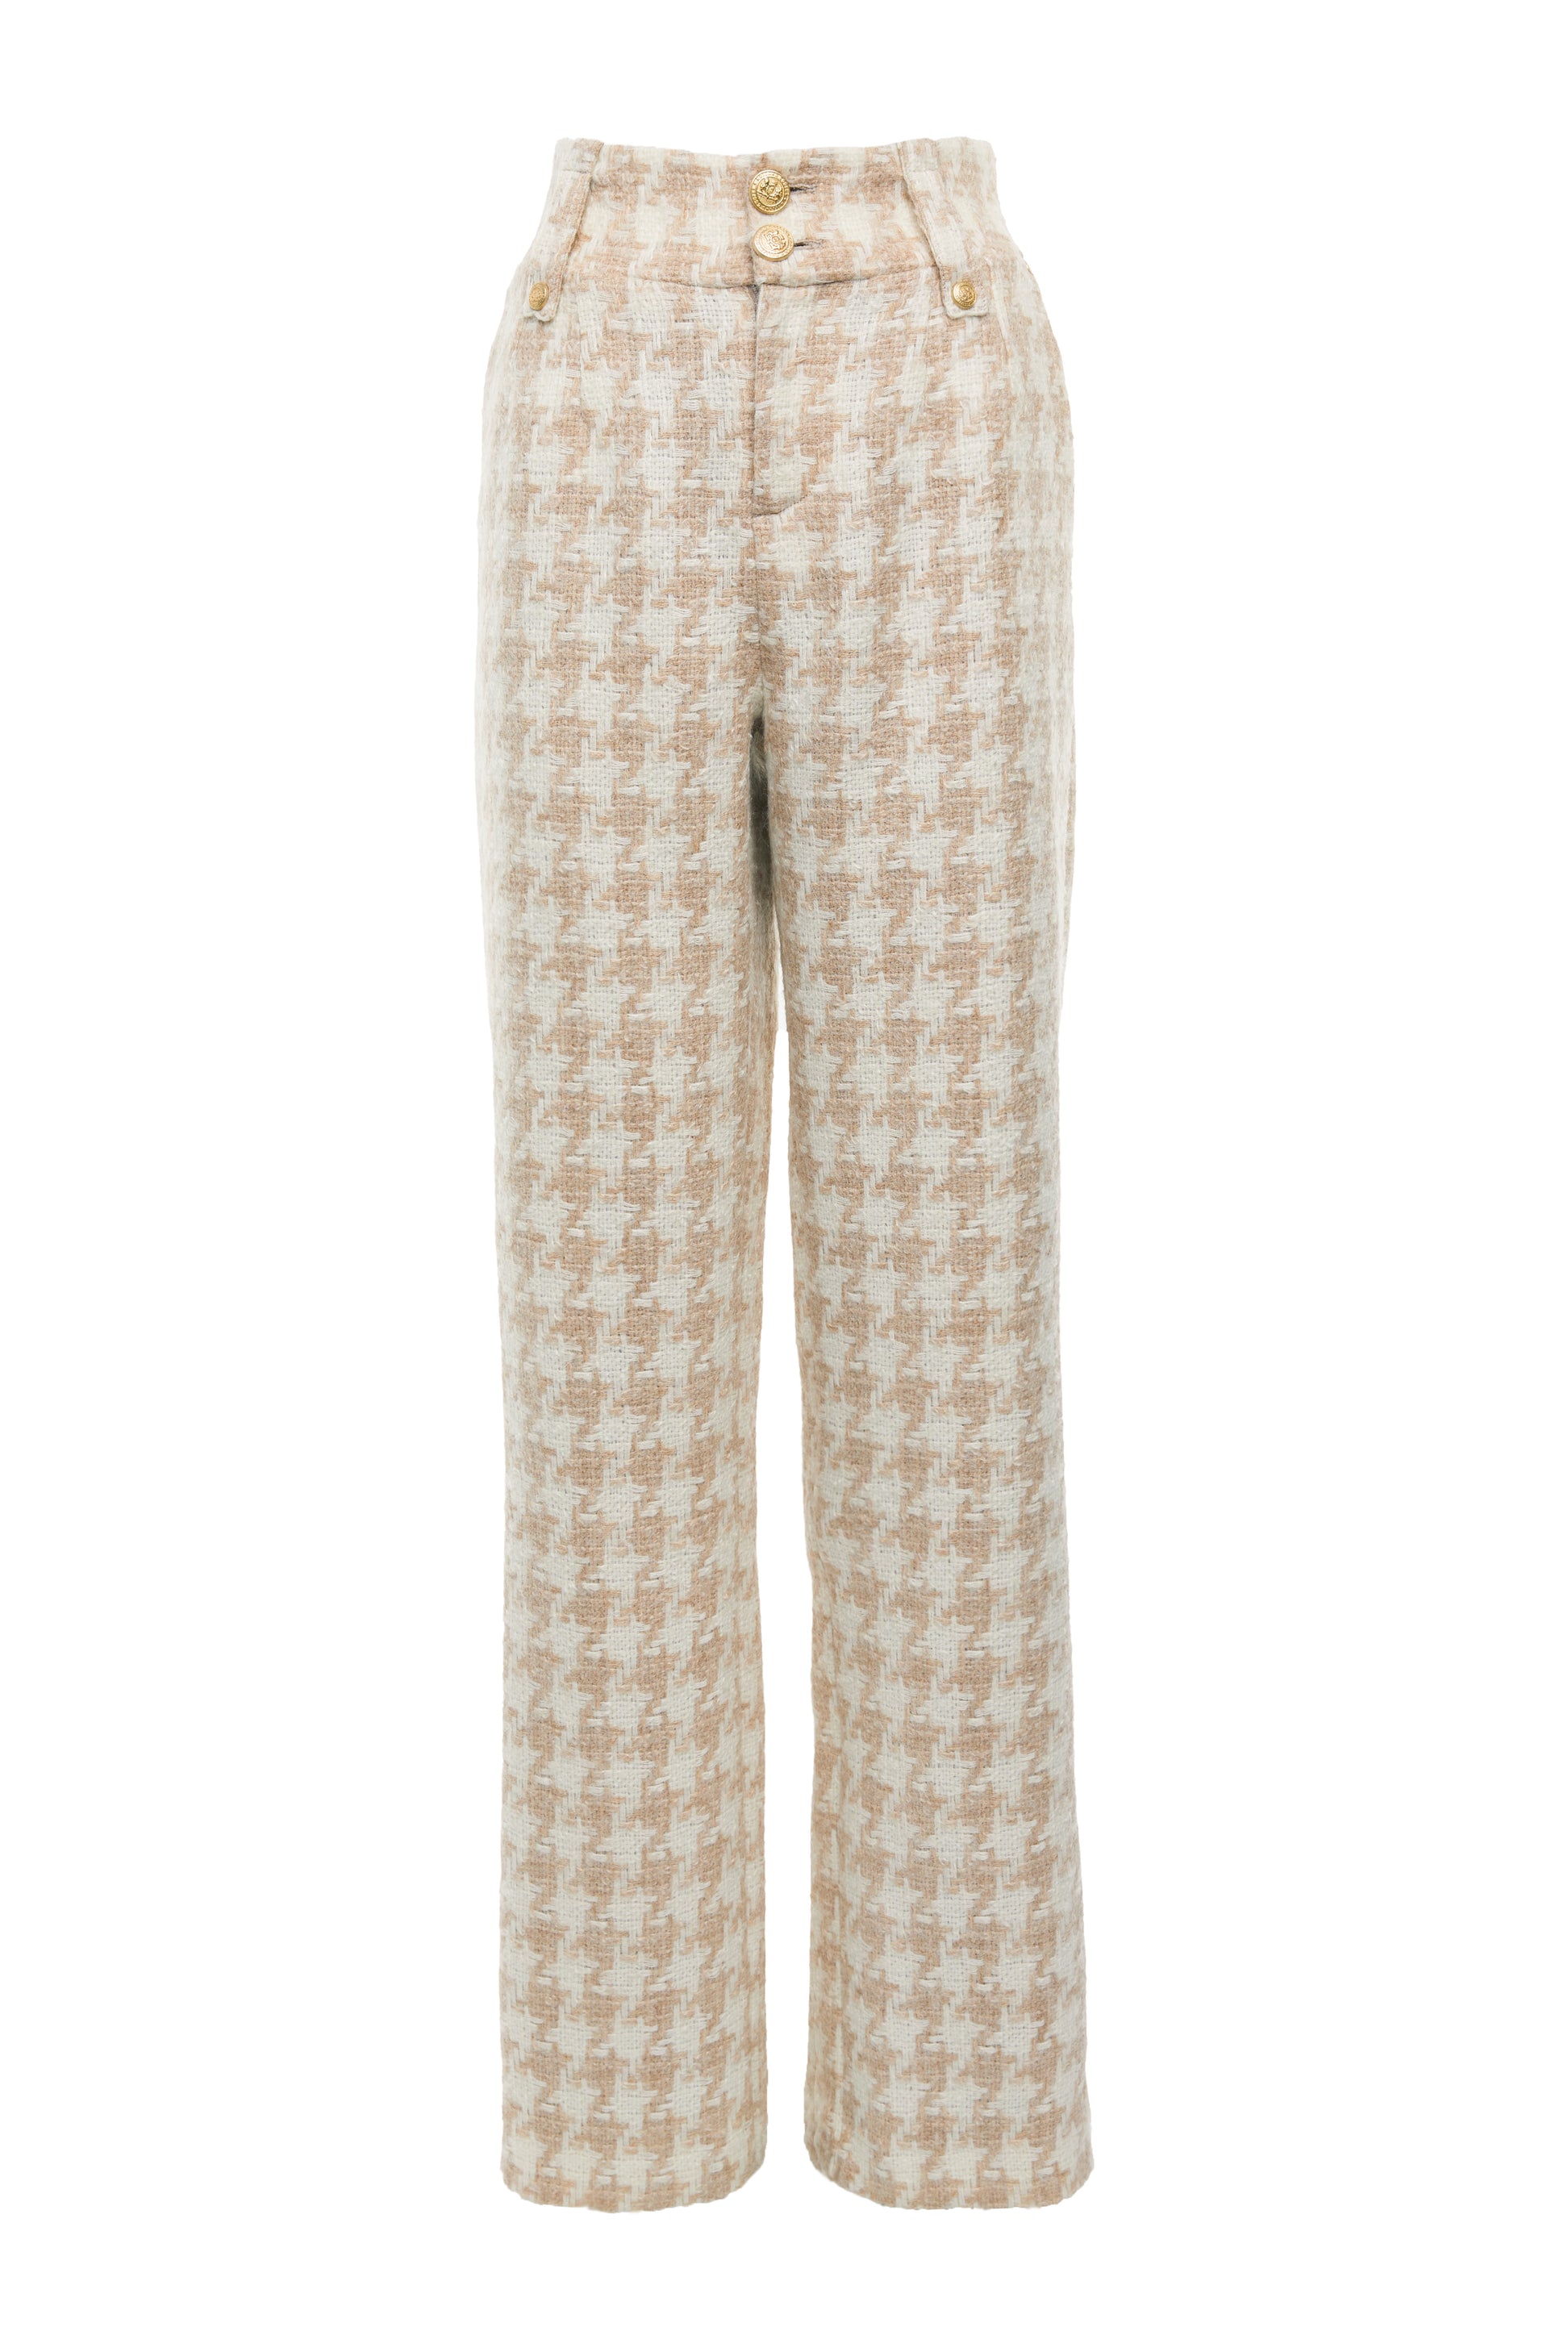 High Waisted Straight Trouser (Camel Houndstooth) – Holland Cooper